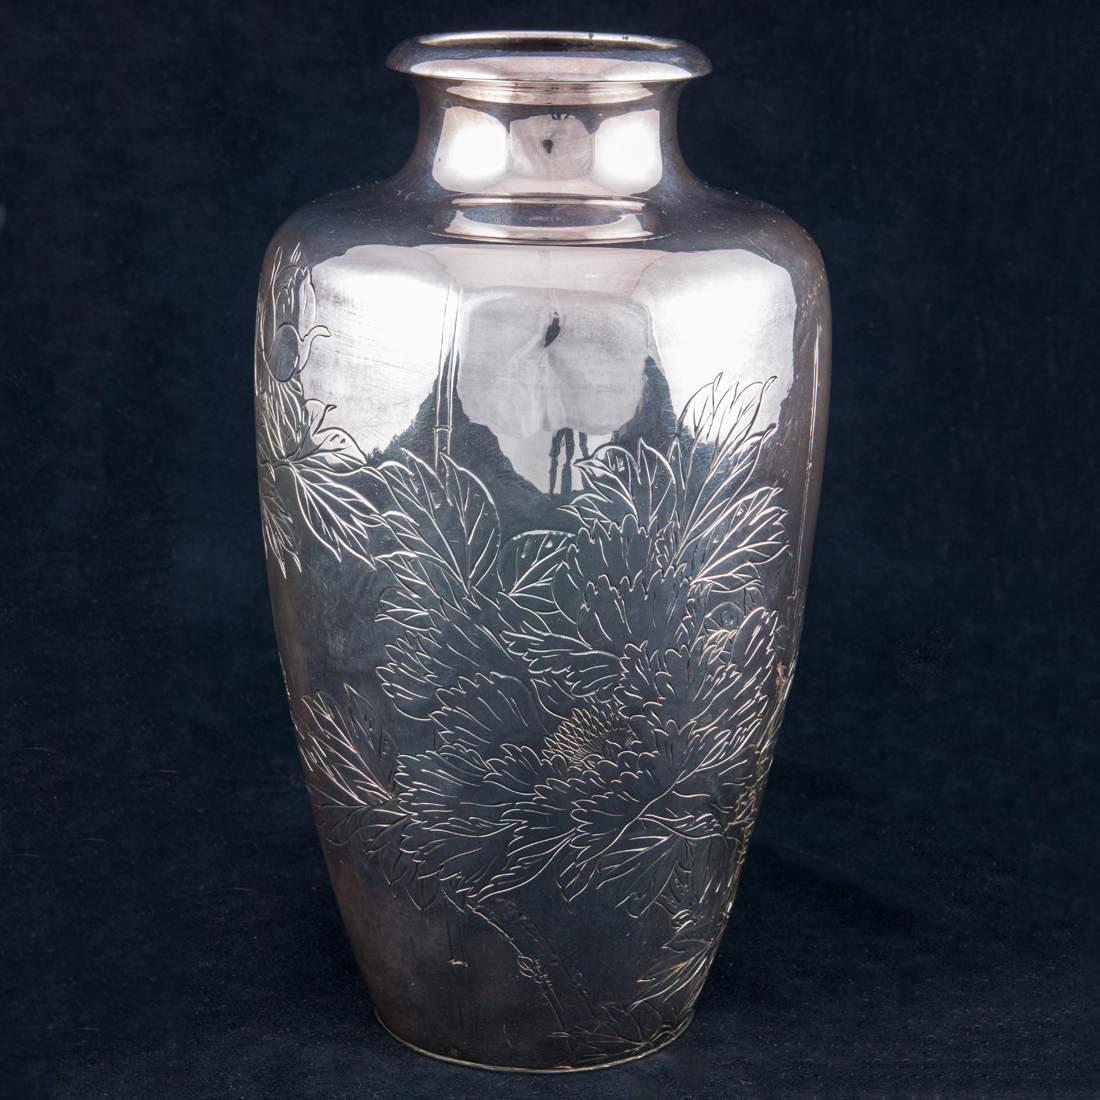 A JAPANESE SILVER VASE A Japanese silver